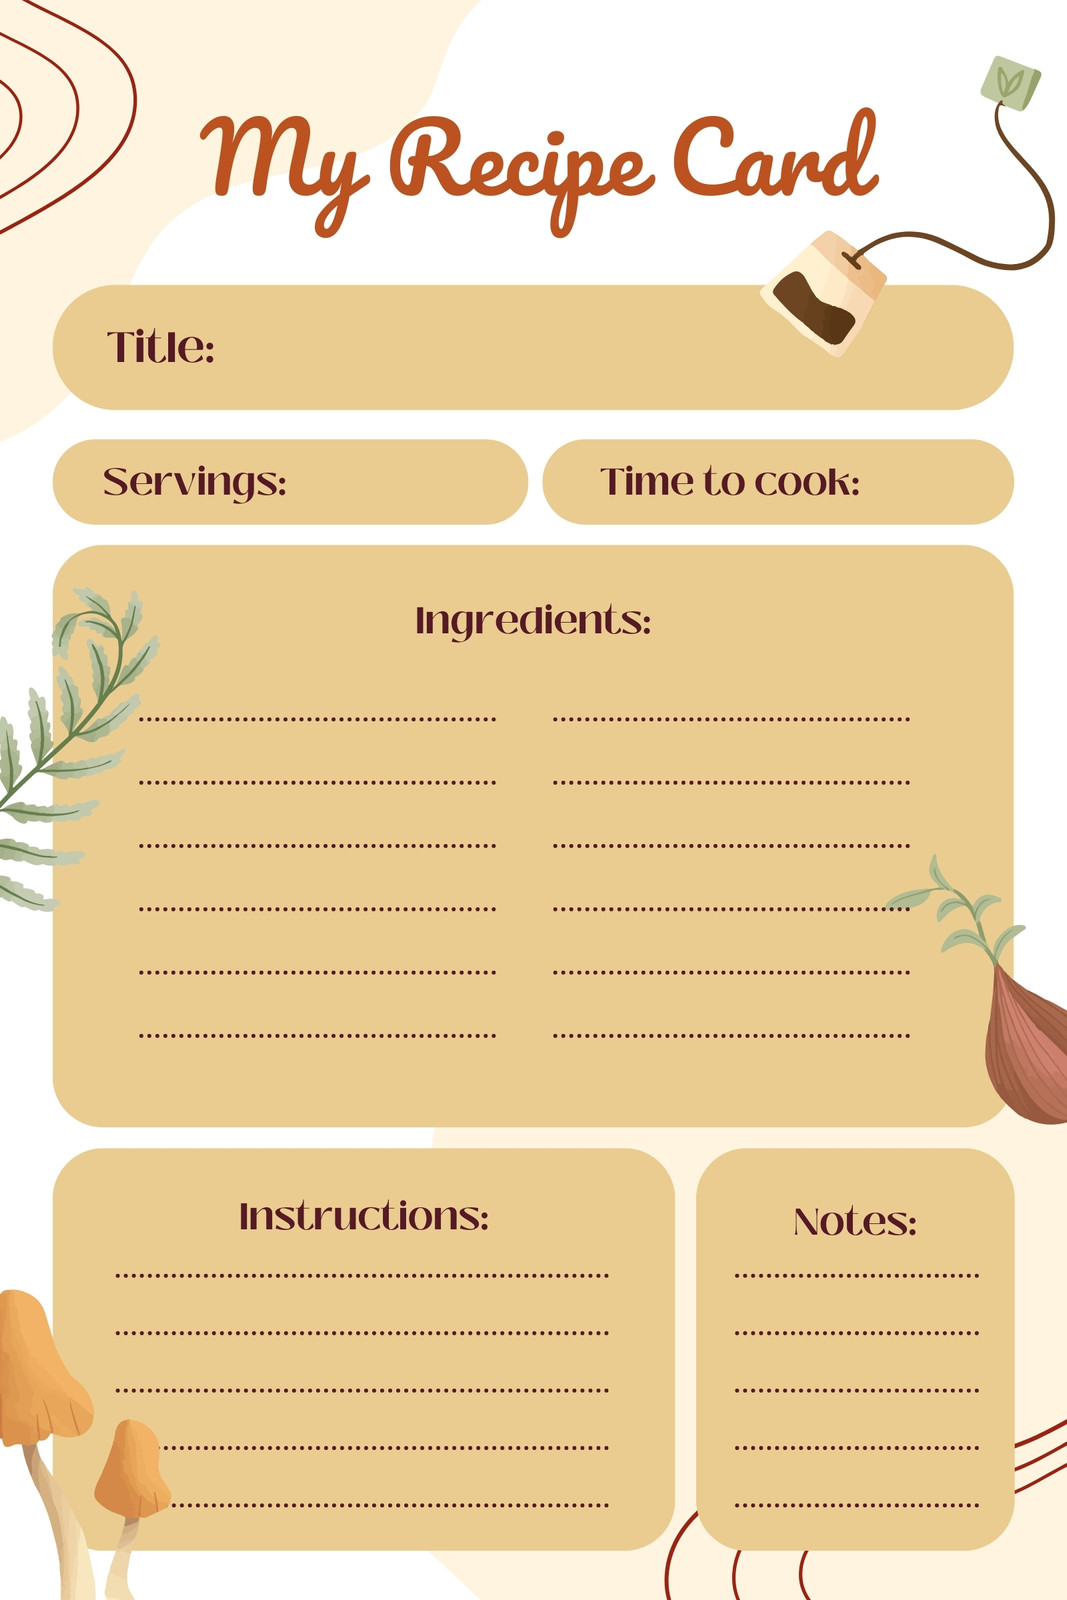 Editable Recipe Card Divider Template Printable Index Card Size 3x5 4x6 5x7  Easy Category for Recipe Box Digital File Instant Download PDF 